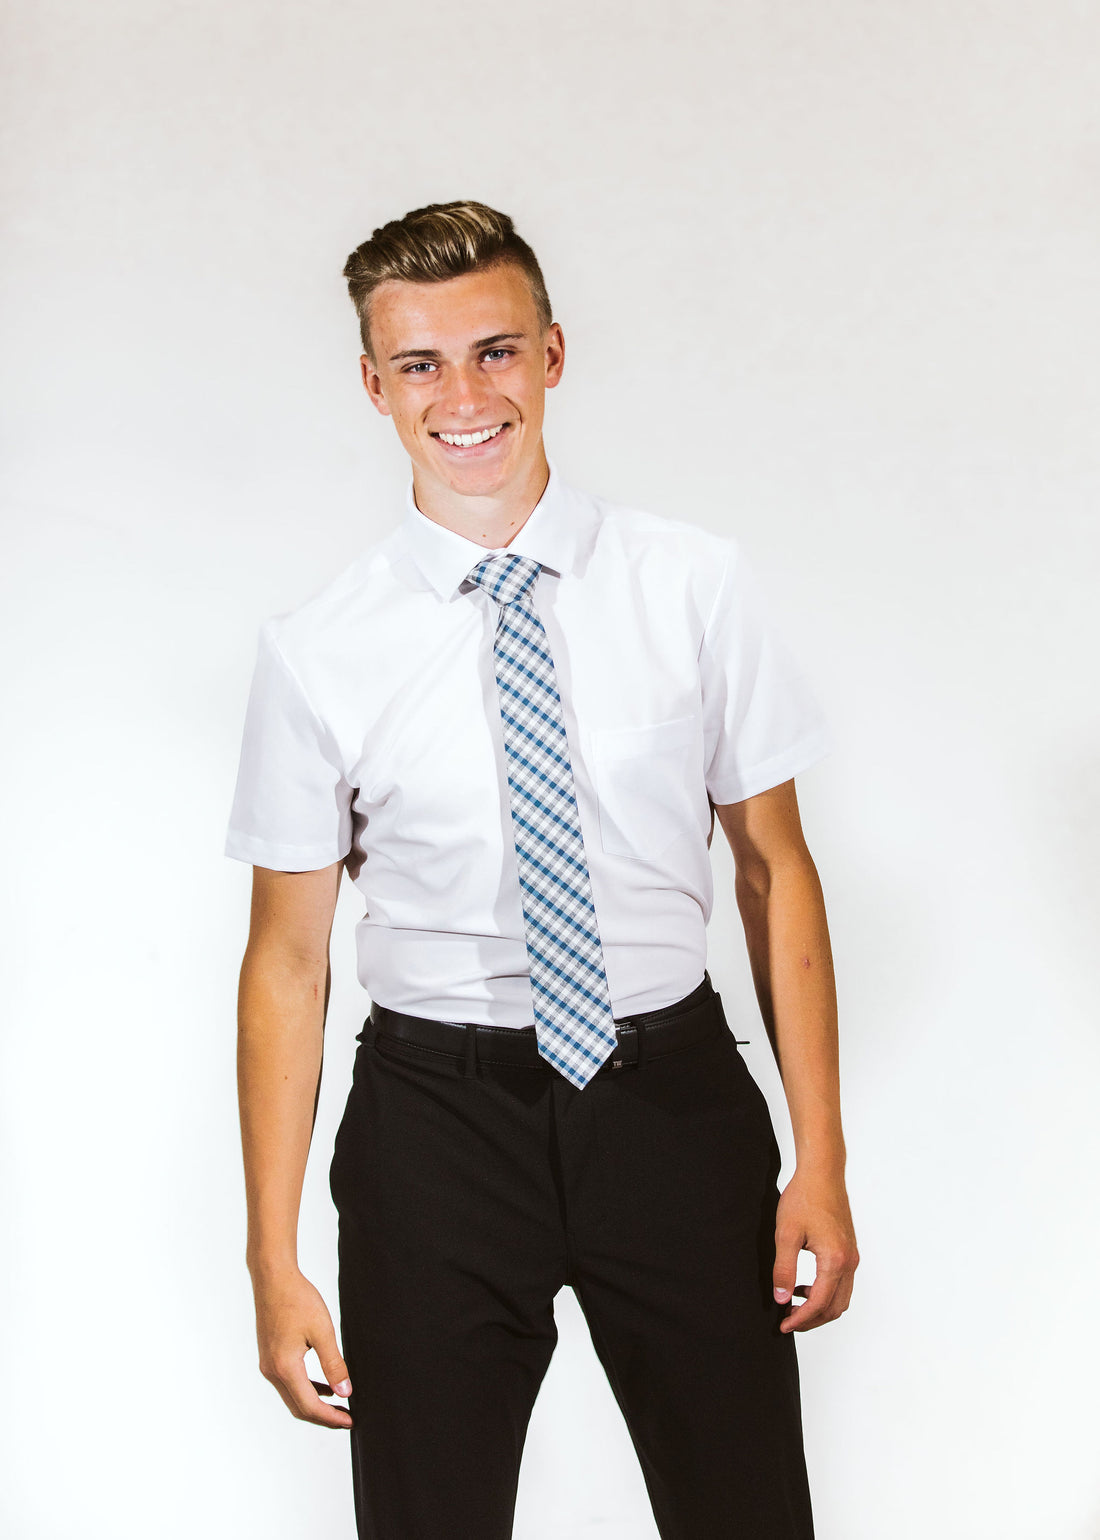 A Guide to Purchasing Missionary Clothing: Where Do LDS Missionaries Shop